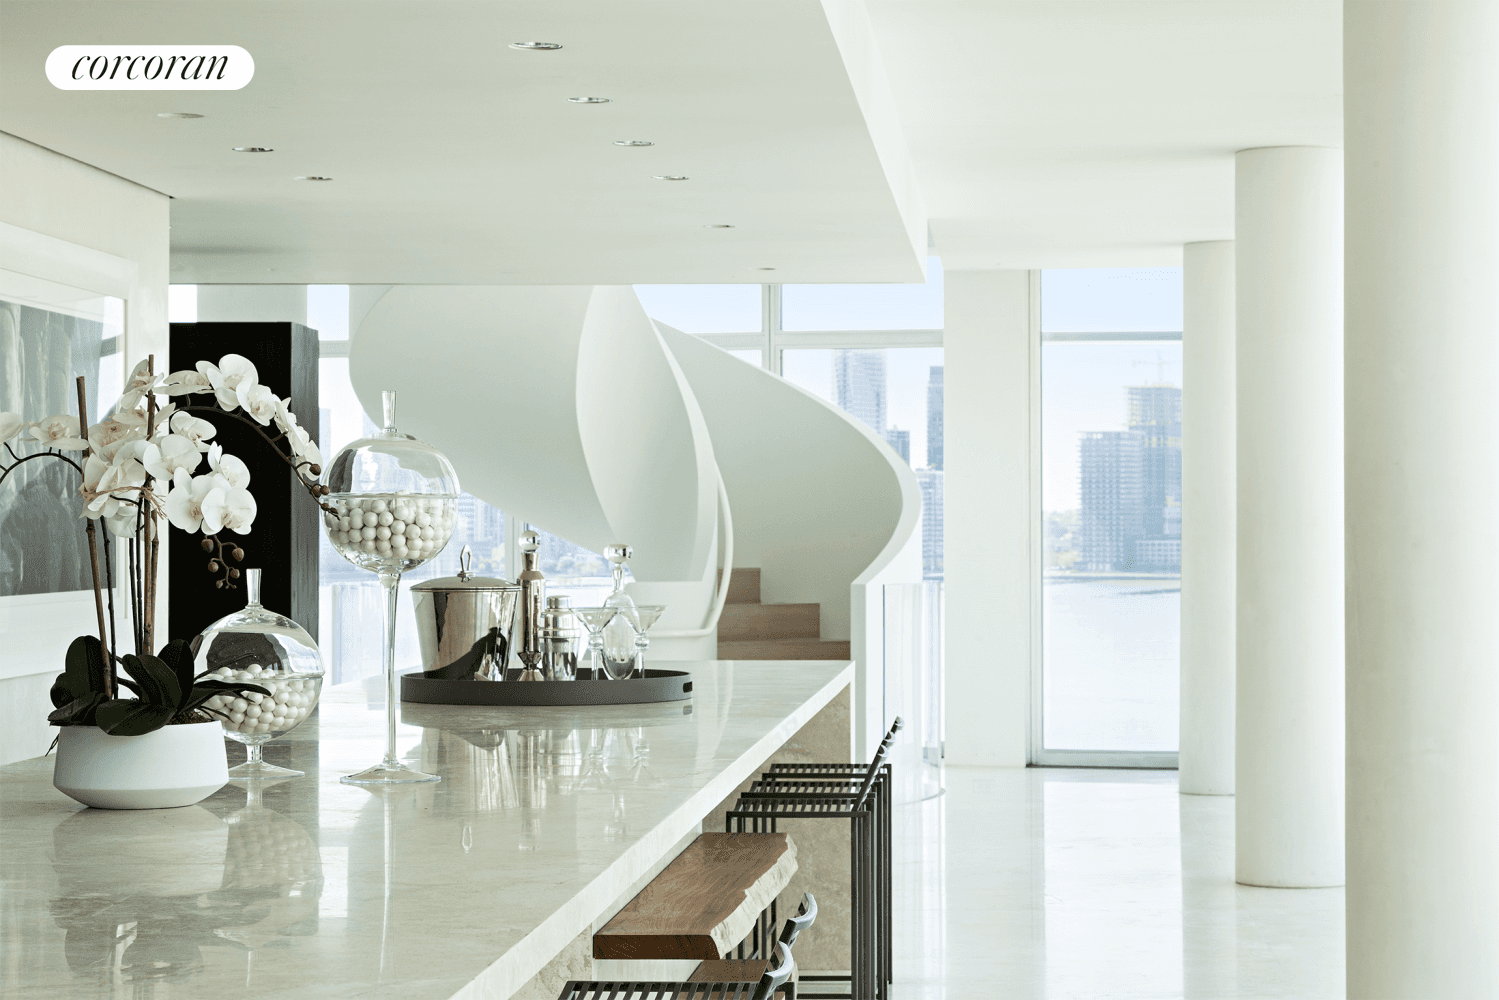 176 Perry Street is a modernist masterpiece designed by internationally acclaimed architect Richard Meier.